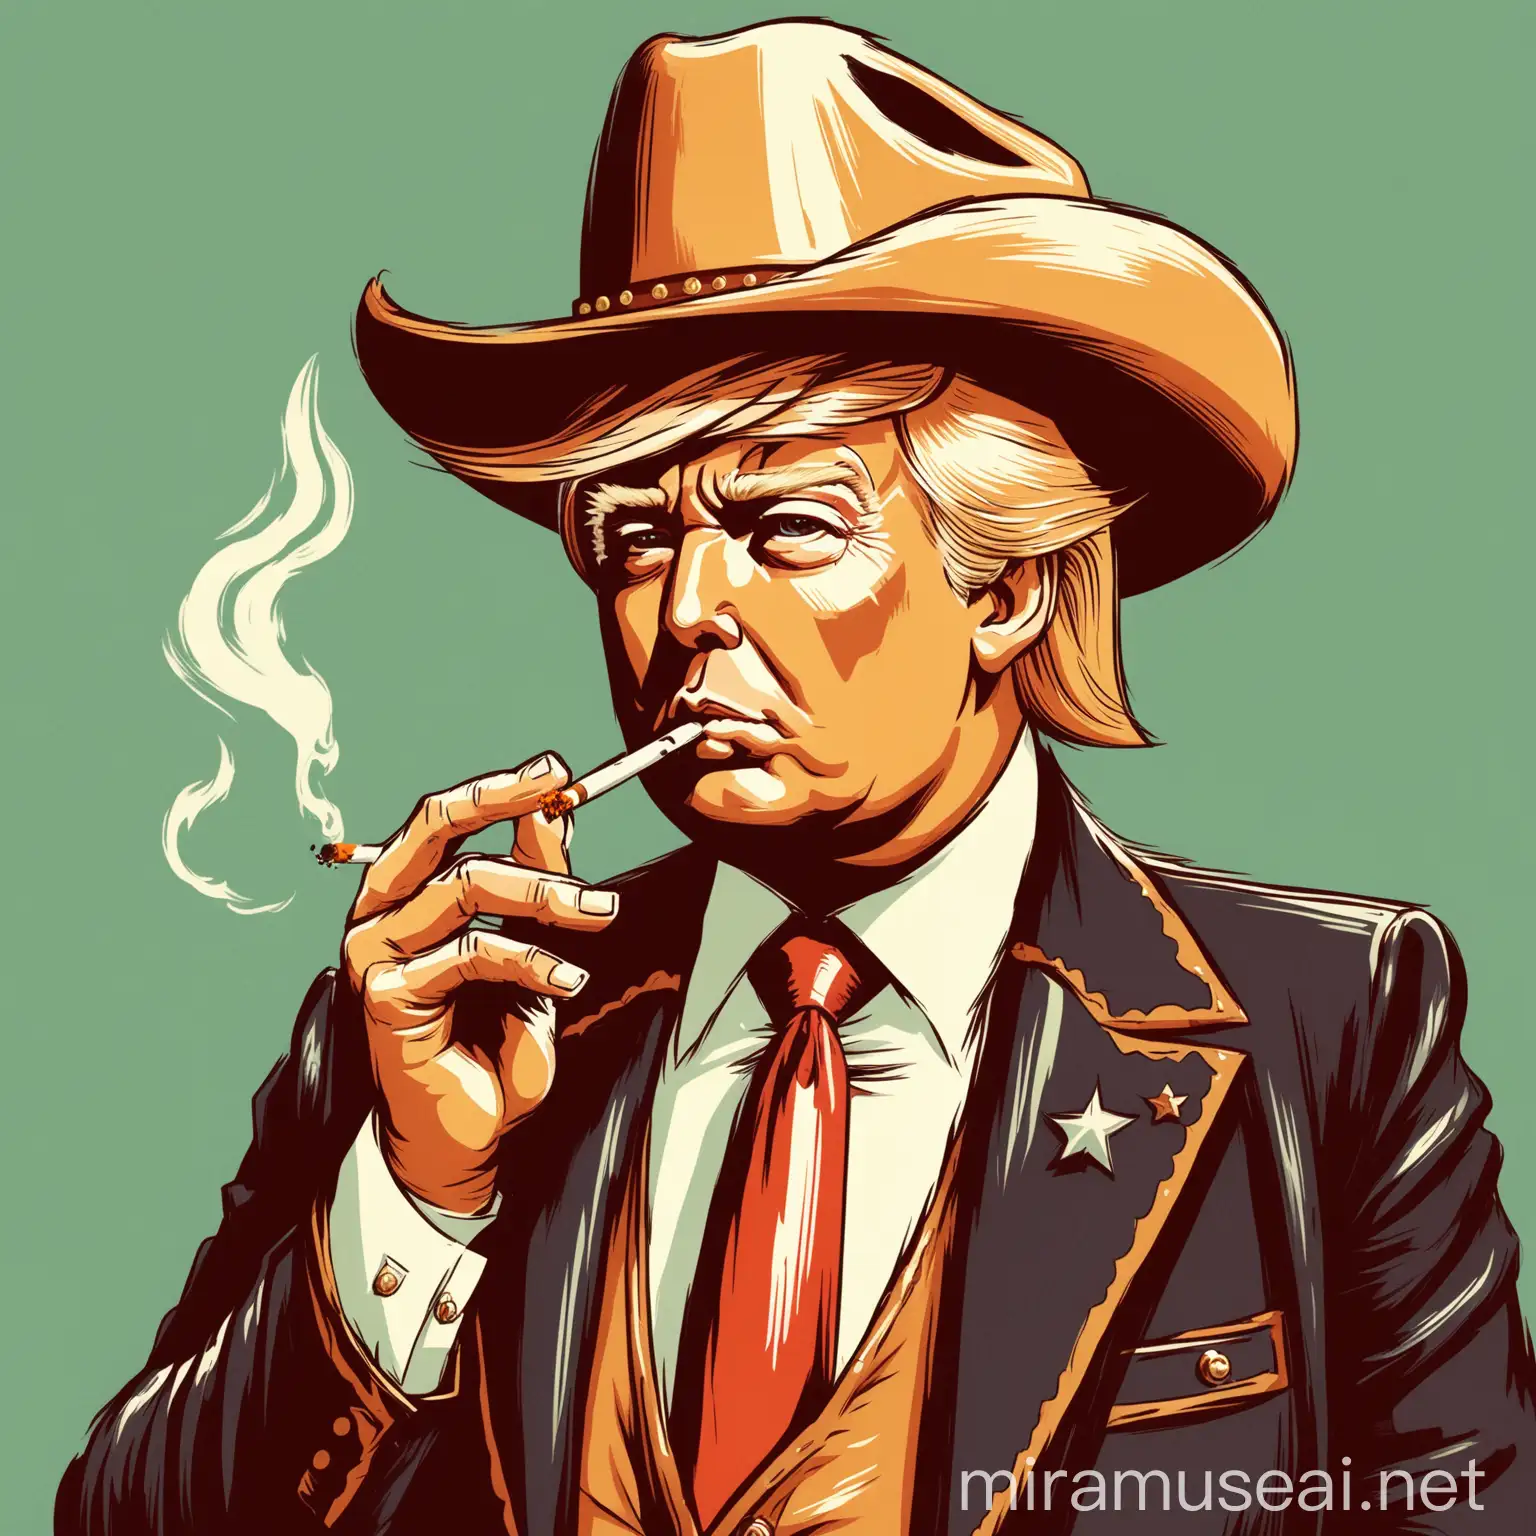 retro illustration of Donald Trump with a cigarette in cowboy outfit
